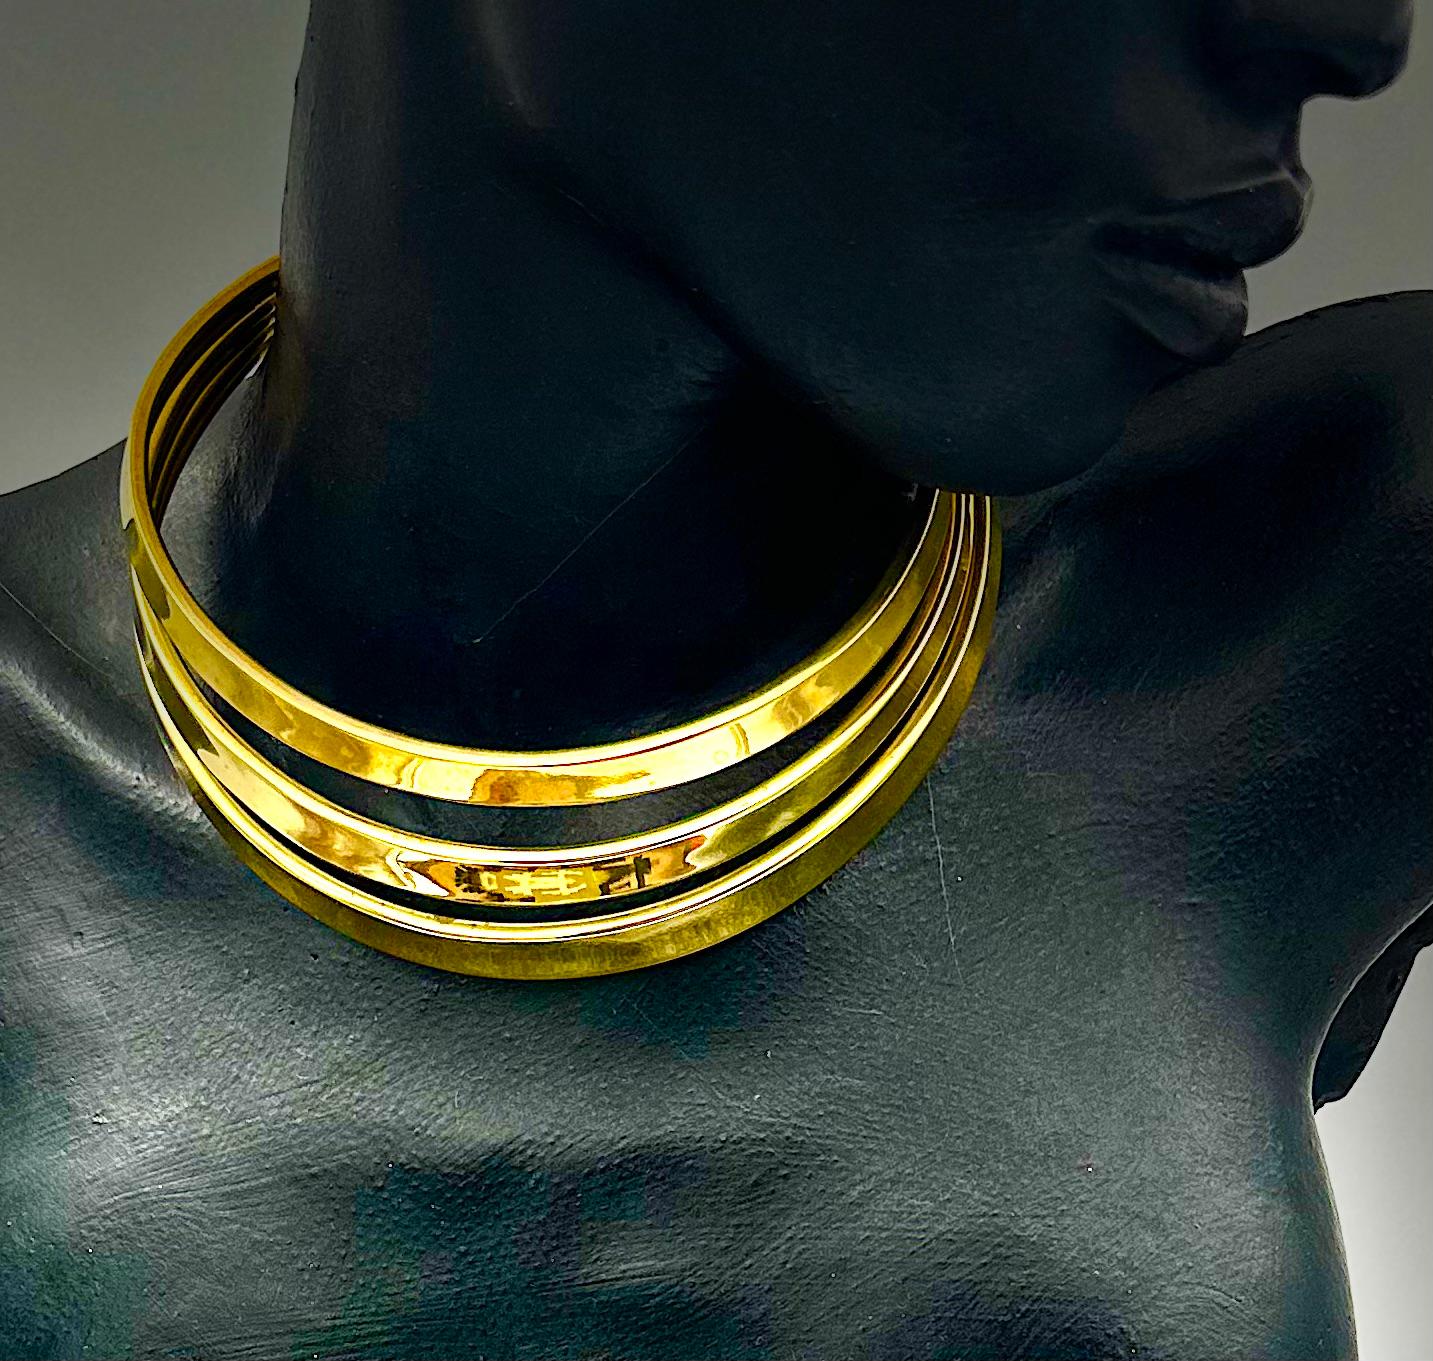 This spectacular brass collar is very dramatic and strong. It is easy to get on and off as the fit is perfect for an average female neck, and the positive negative effect is stunning. Three separately made concave collars with prominent edging, are